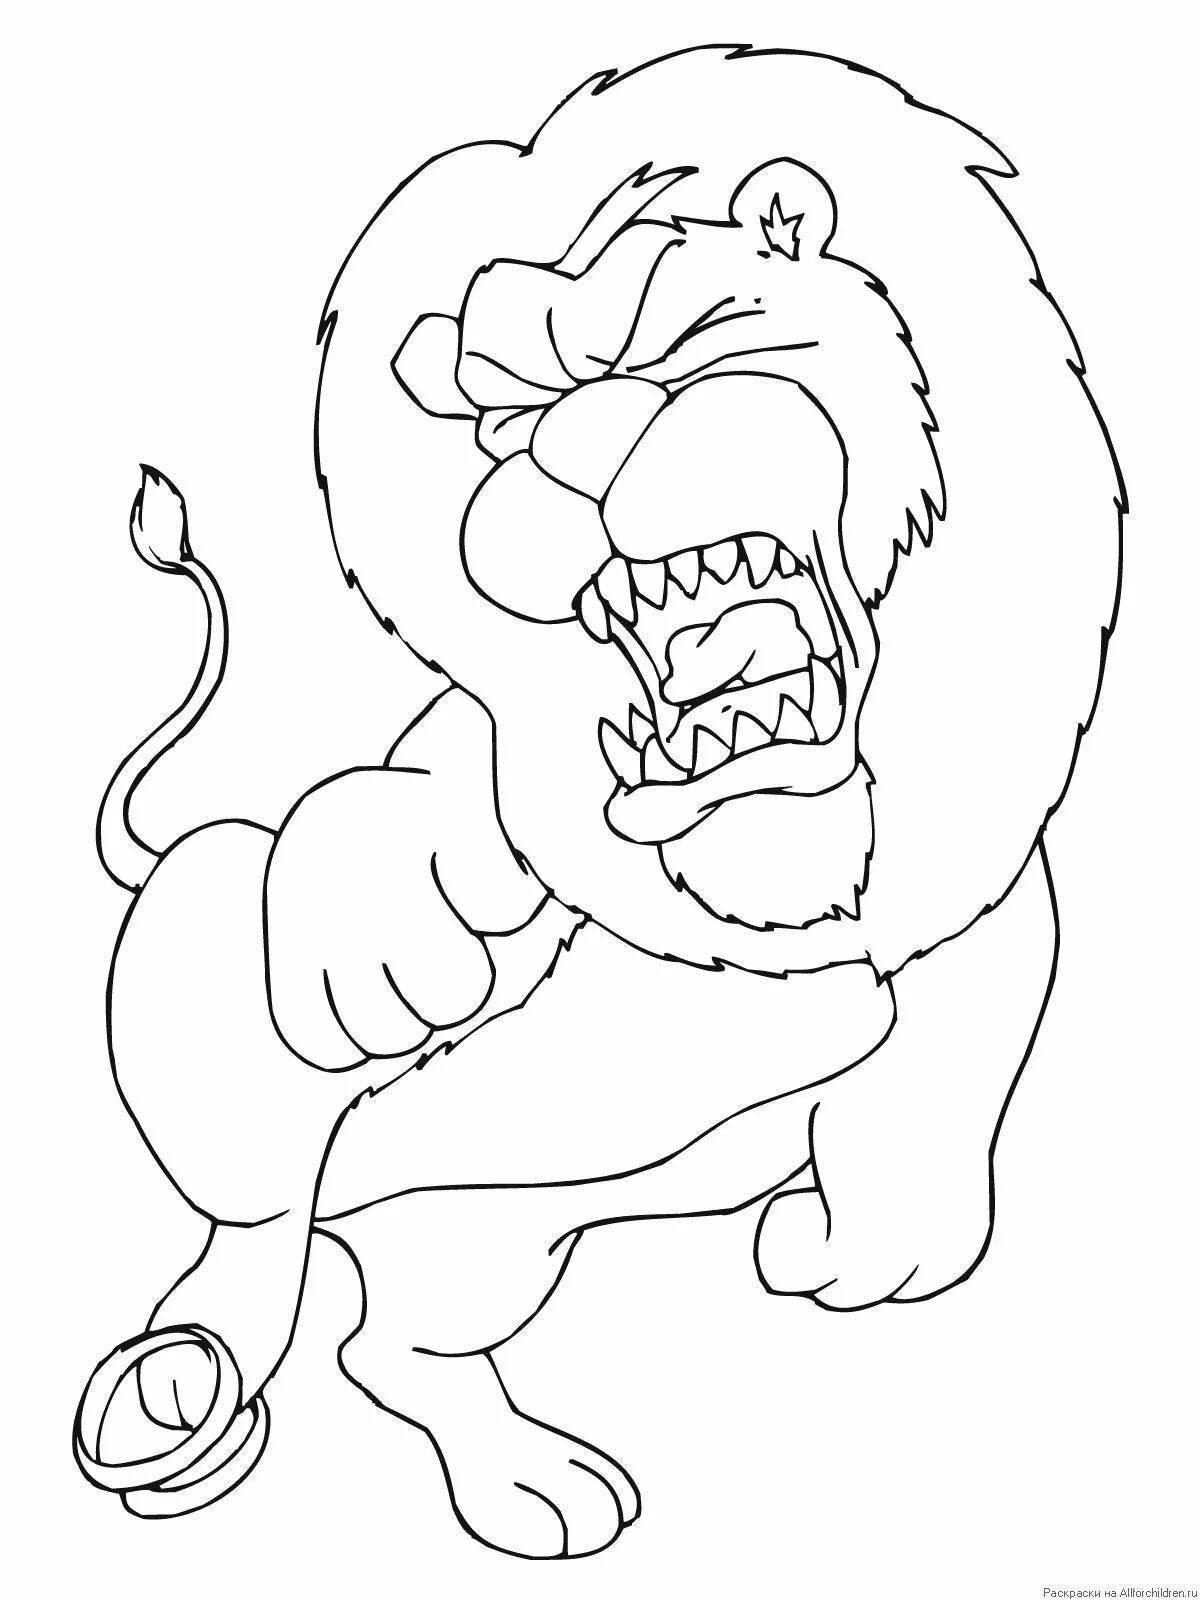 Gorgeous tooth war beast coloring page